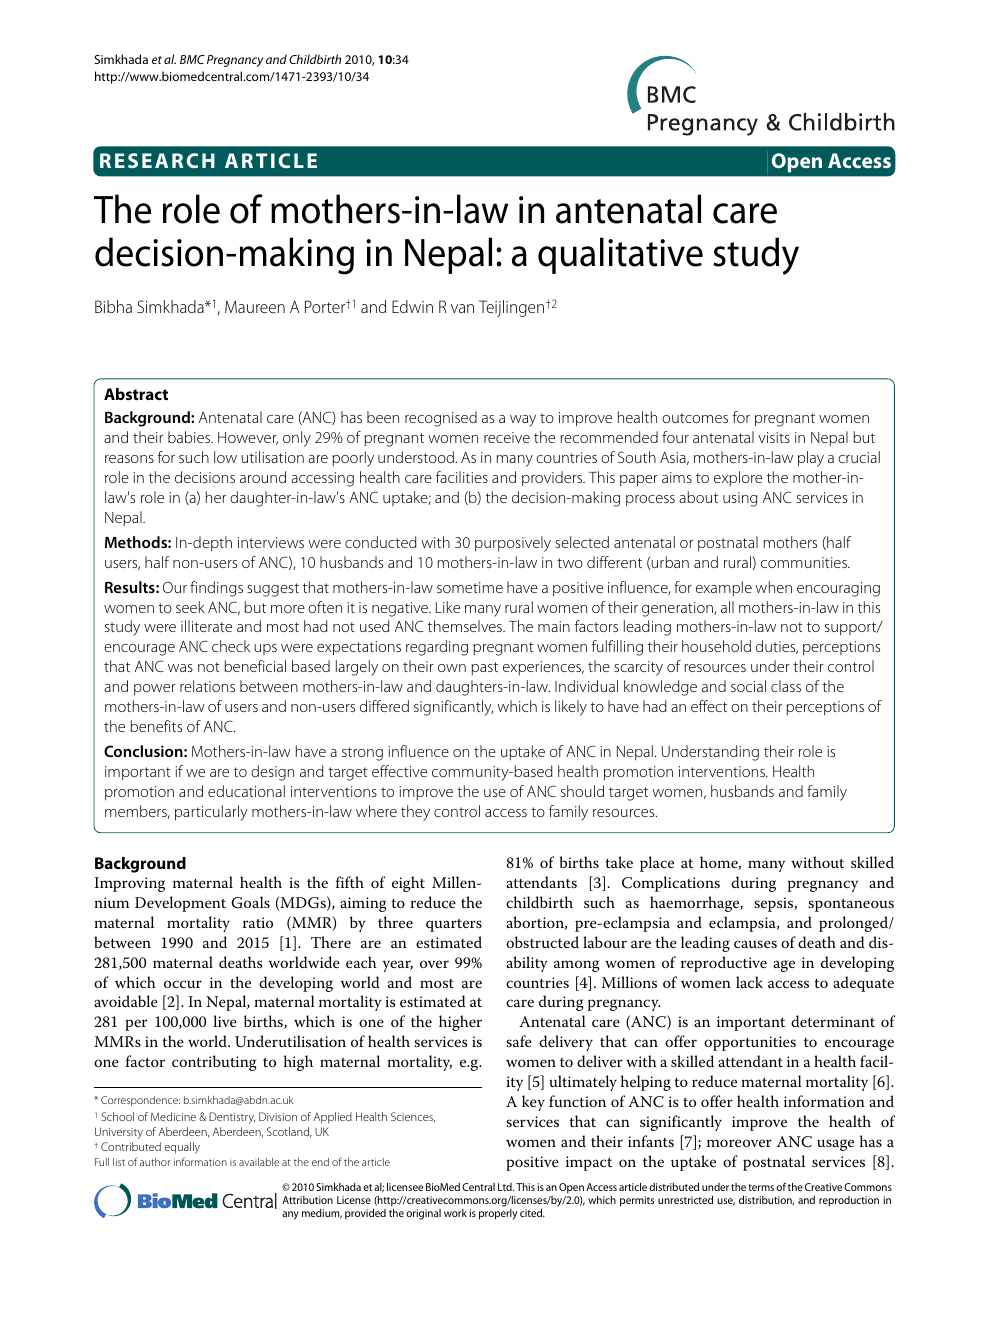 The role of mothers-in-law in antenatal care decision-making in Nepal: a  qualitative study – topic of research paper in Health sciences. Download  scholarly article PDF and read for free on CyberLeninka open